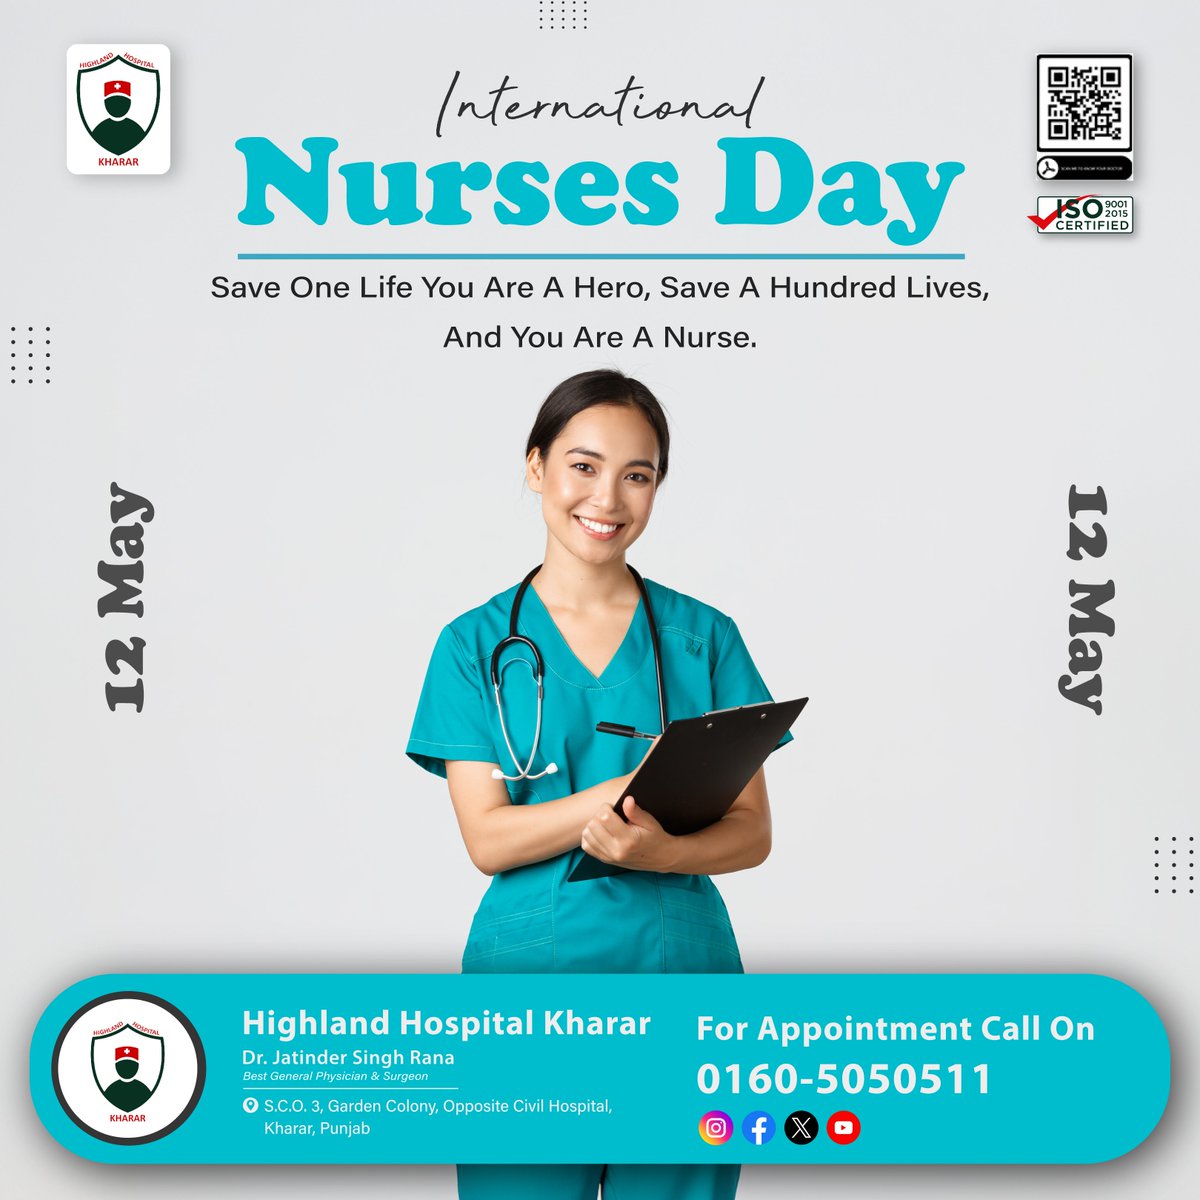 Saluting the heroes in scrubs on #InternationalNursesDay! At #HighlandHospitalKharar, we honor the dedication and compassion of our #nursing #staff. Thank you for your tireless service
.
#NursesRock #Heroes #Care #Dedication #Service #Kharar #Mohali #DrJatinderSingh #Besthospital